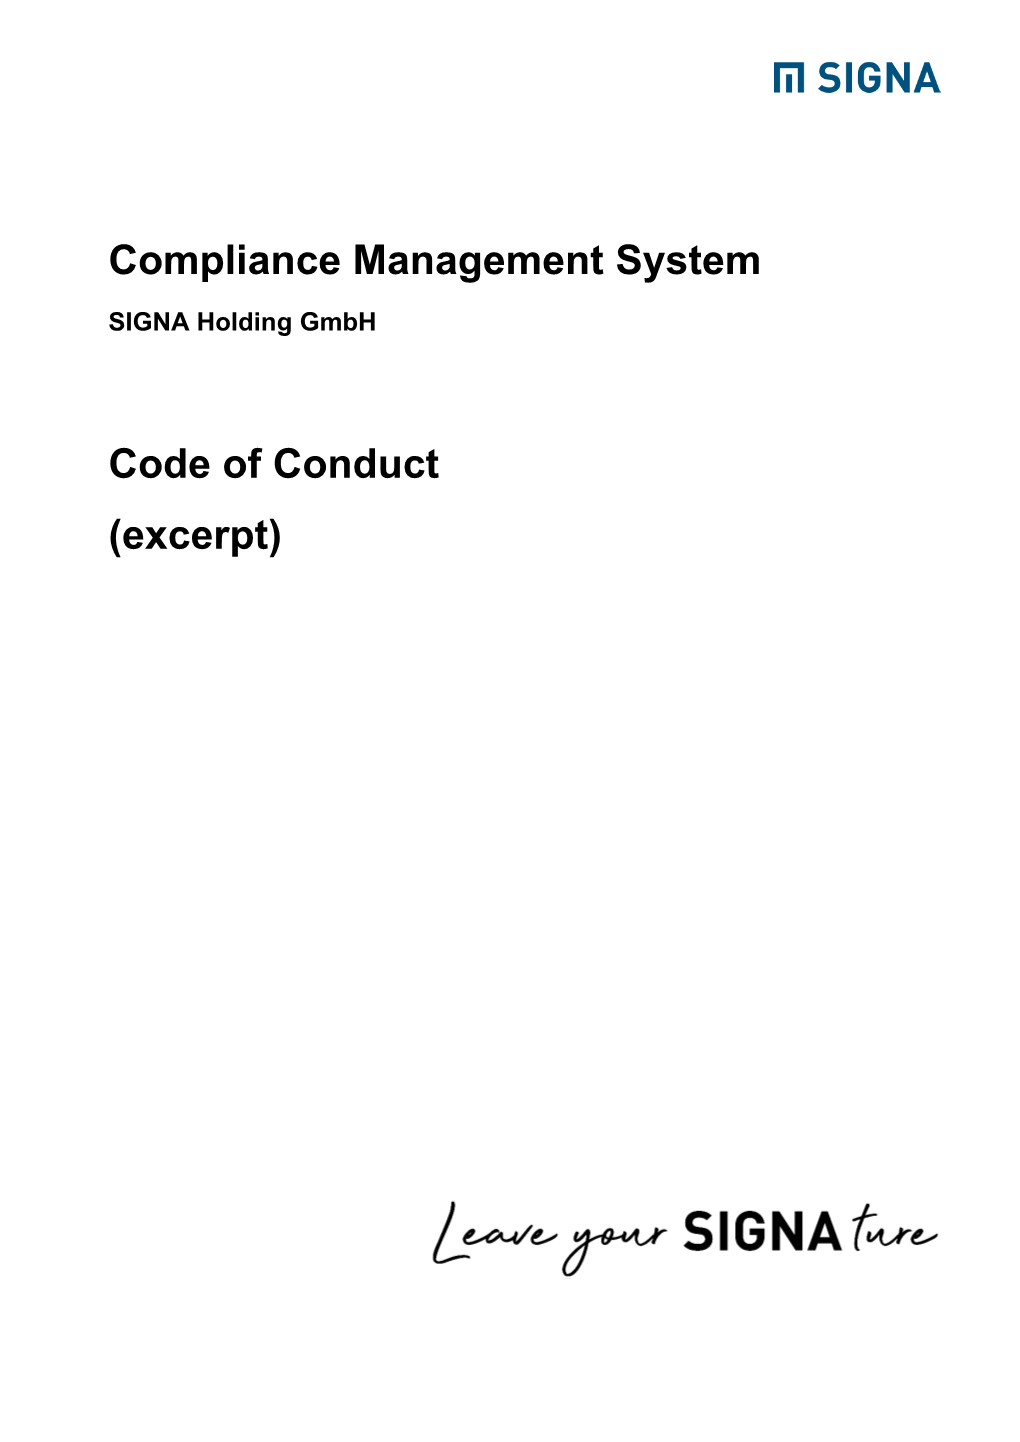 Compliance Management System Code of Conduct